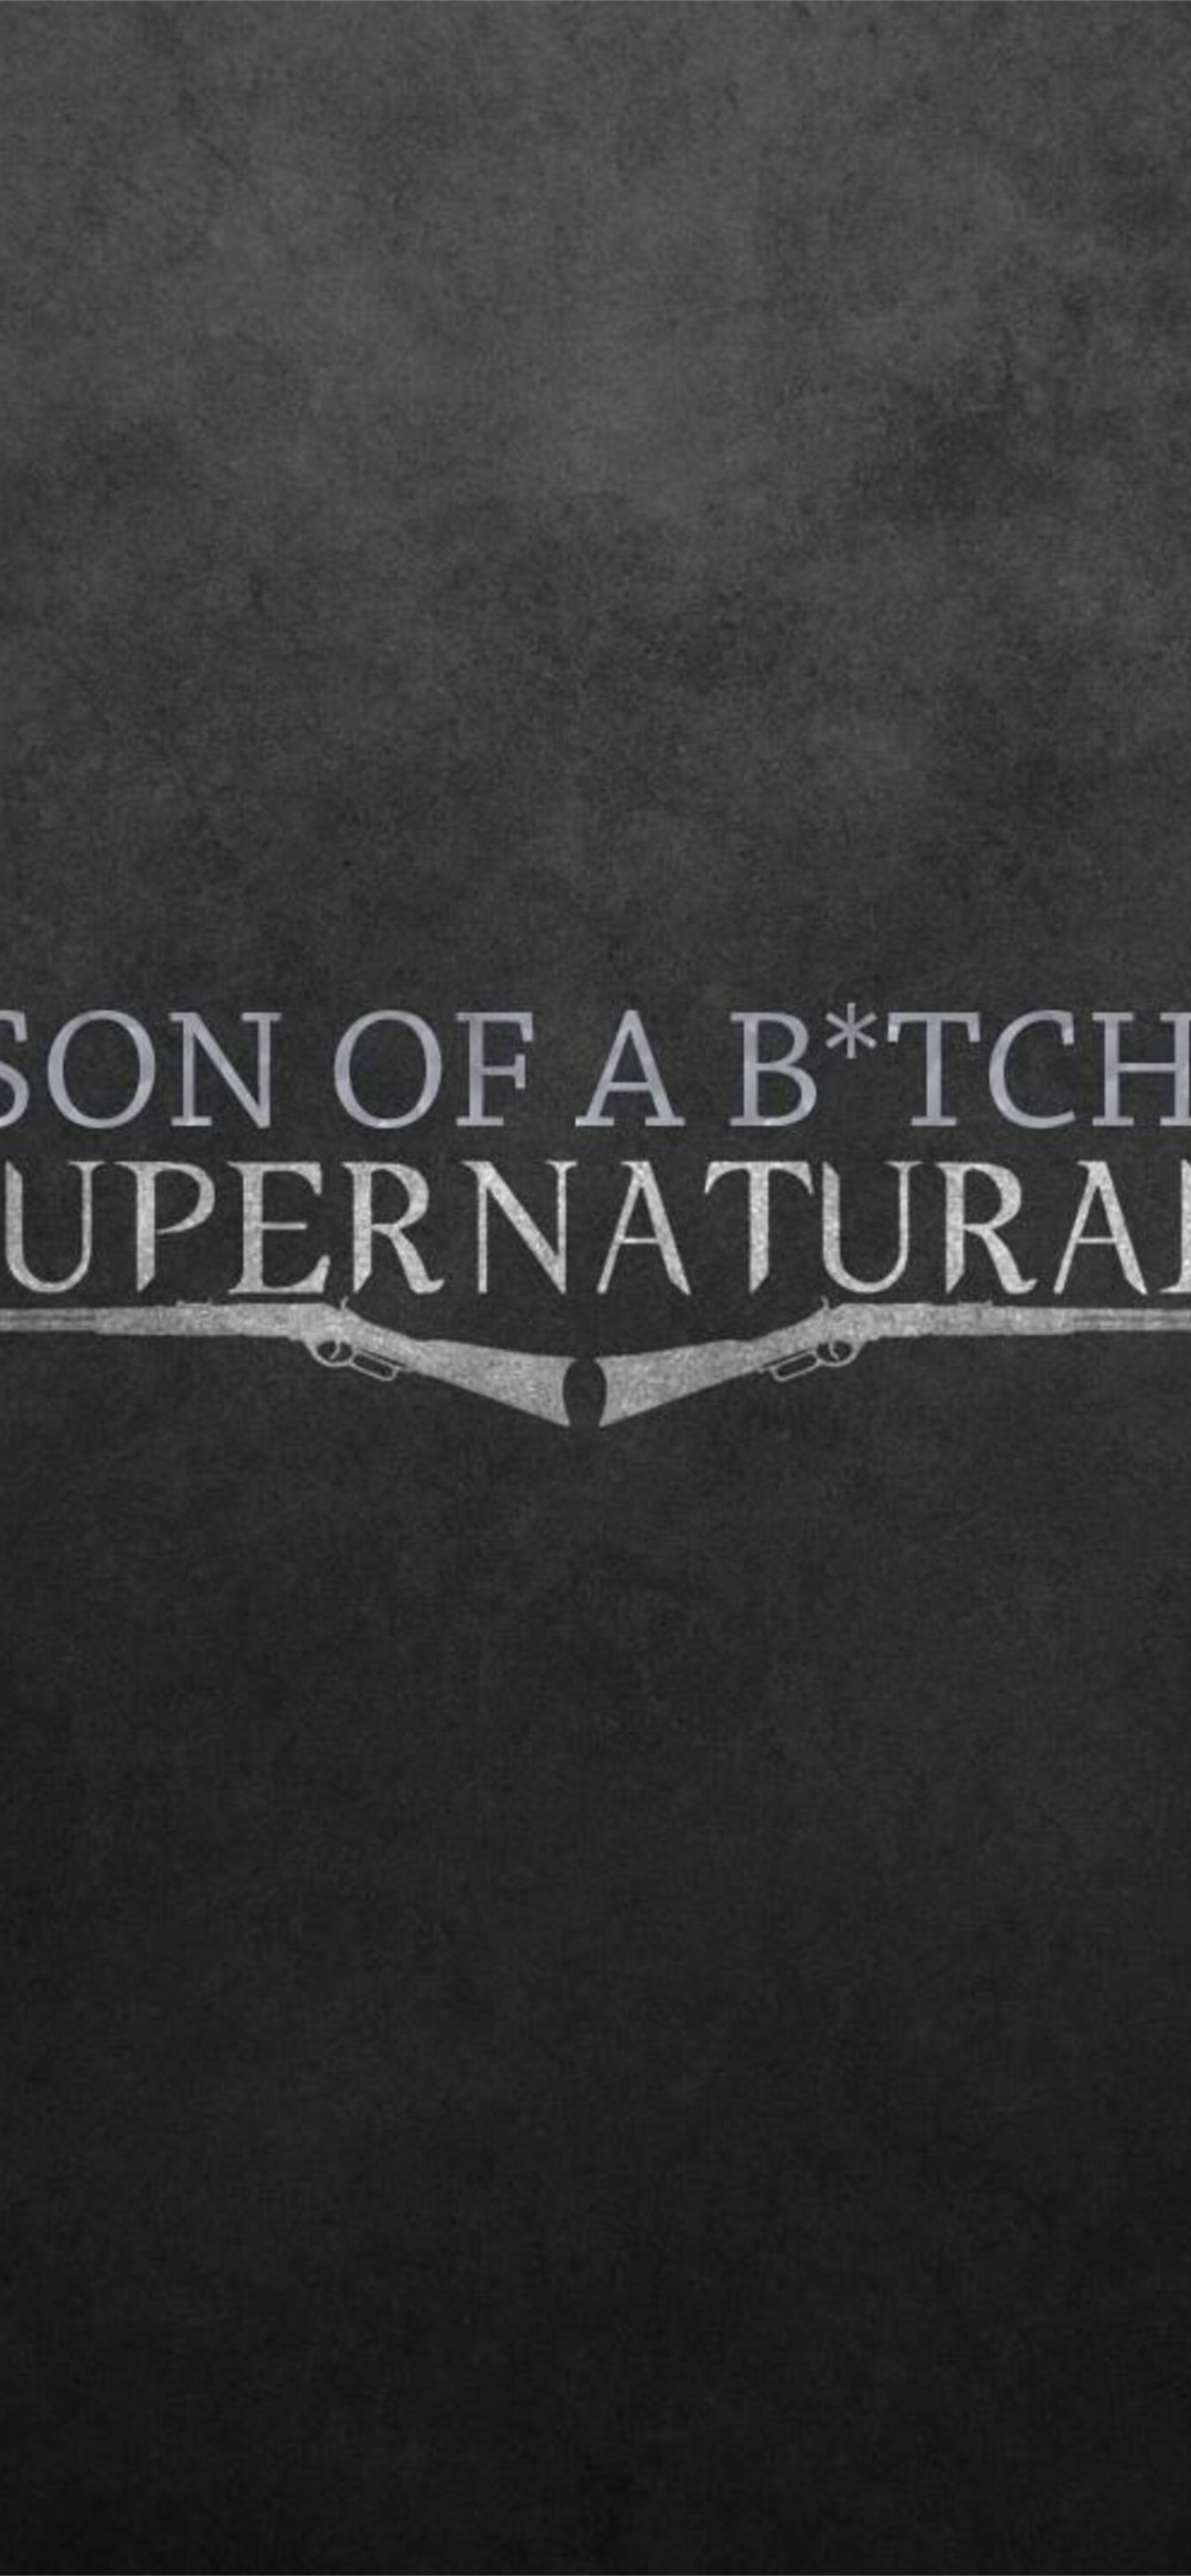 Supernatural wallpaper PLEASE GIVE CREDIT TO THE OWNER LIKE IF YOU USE IT